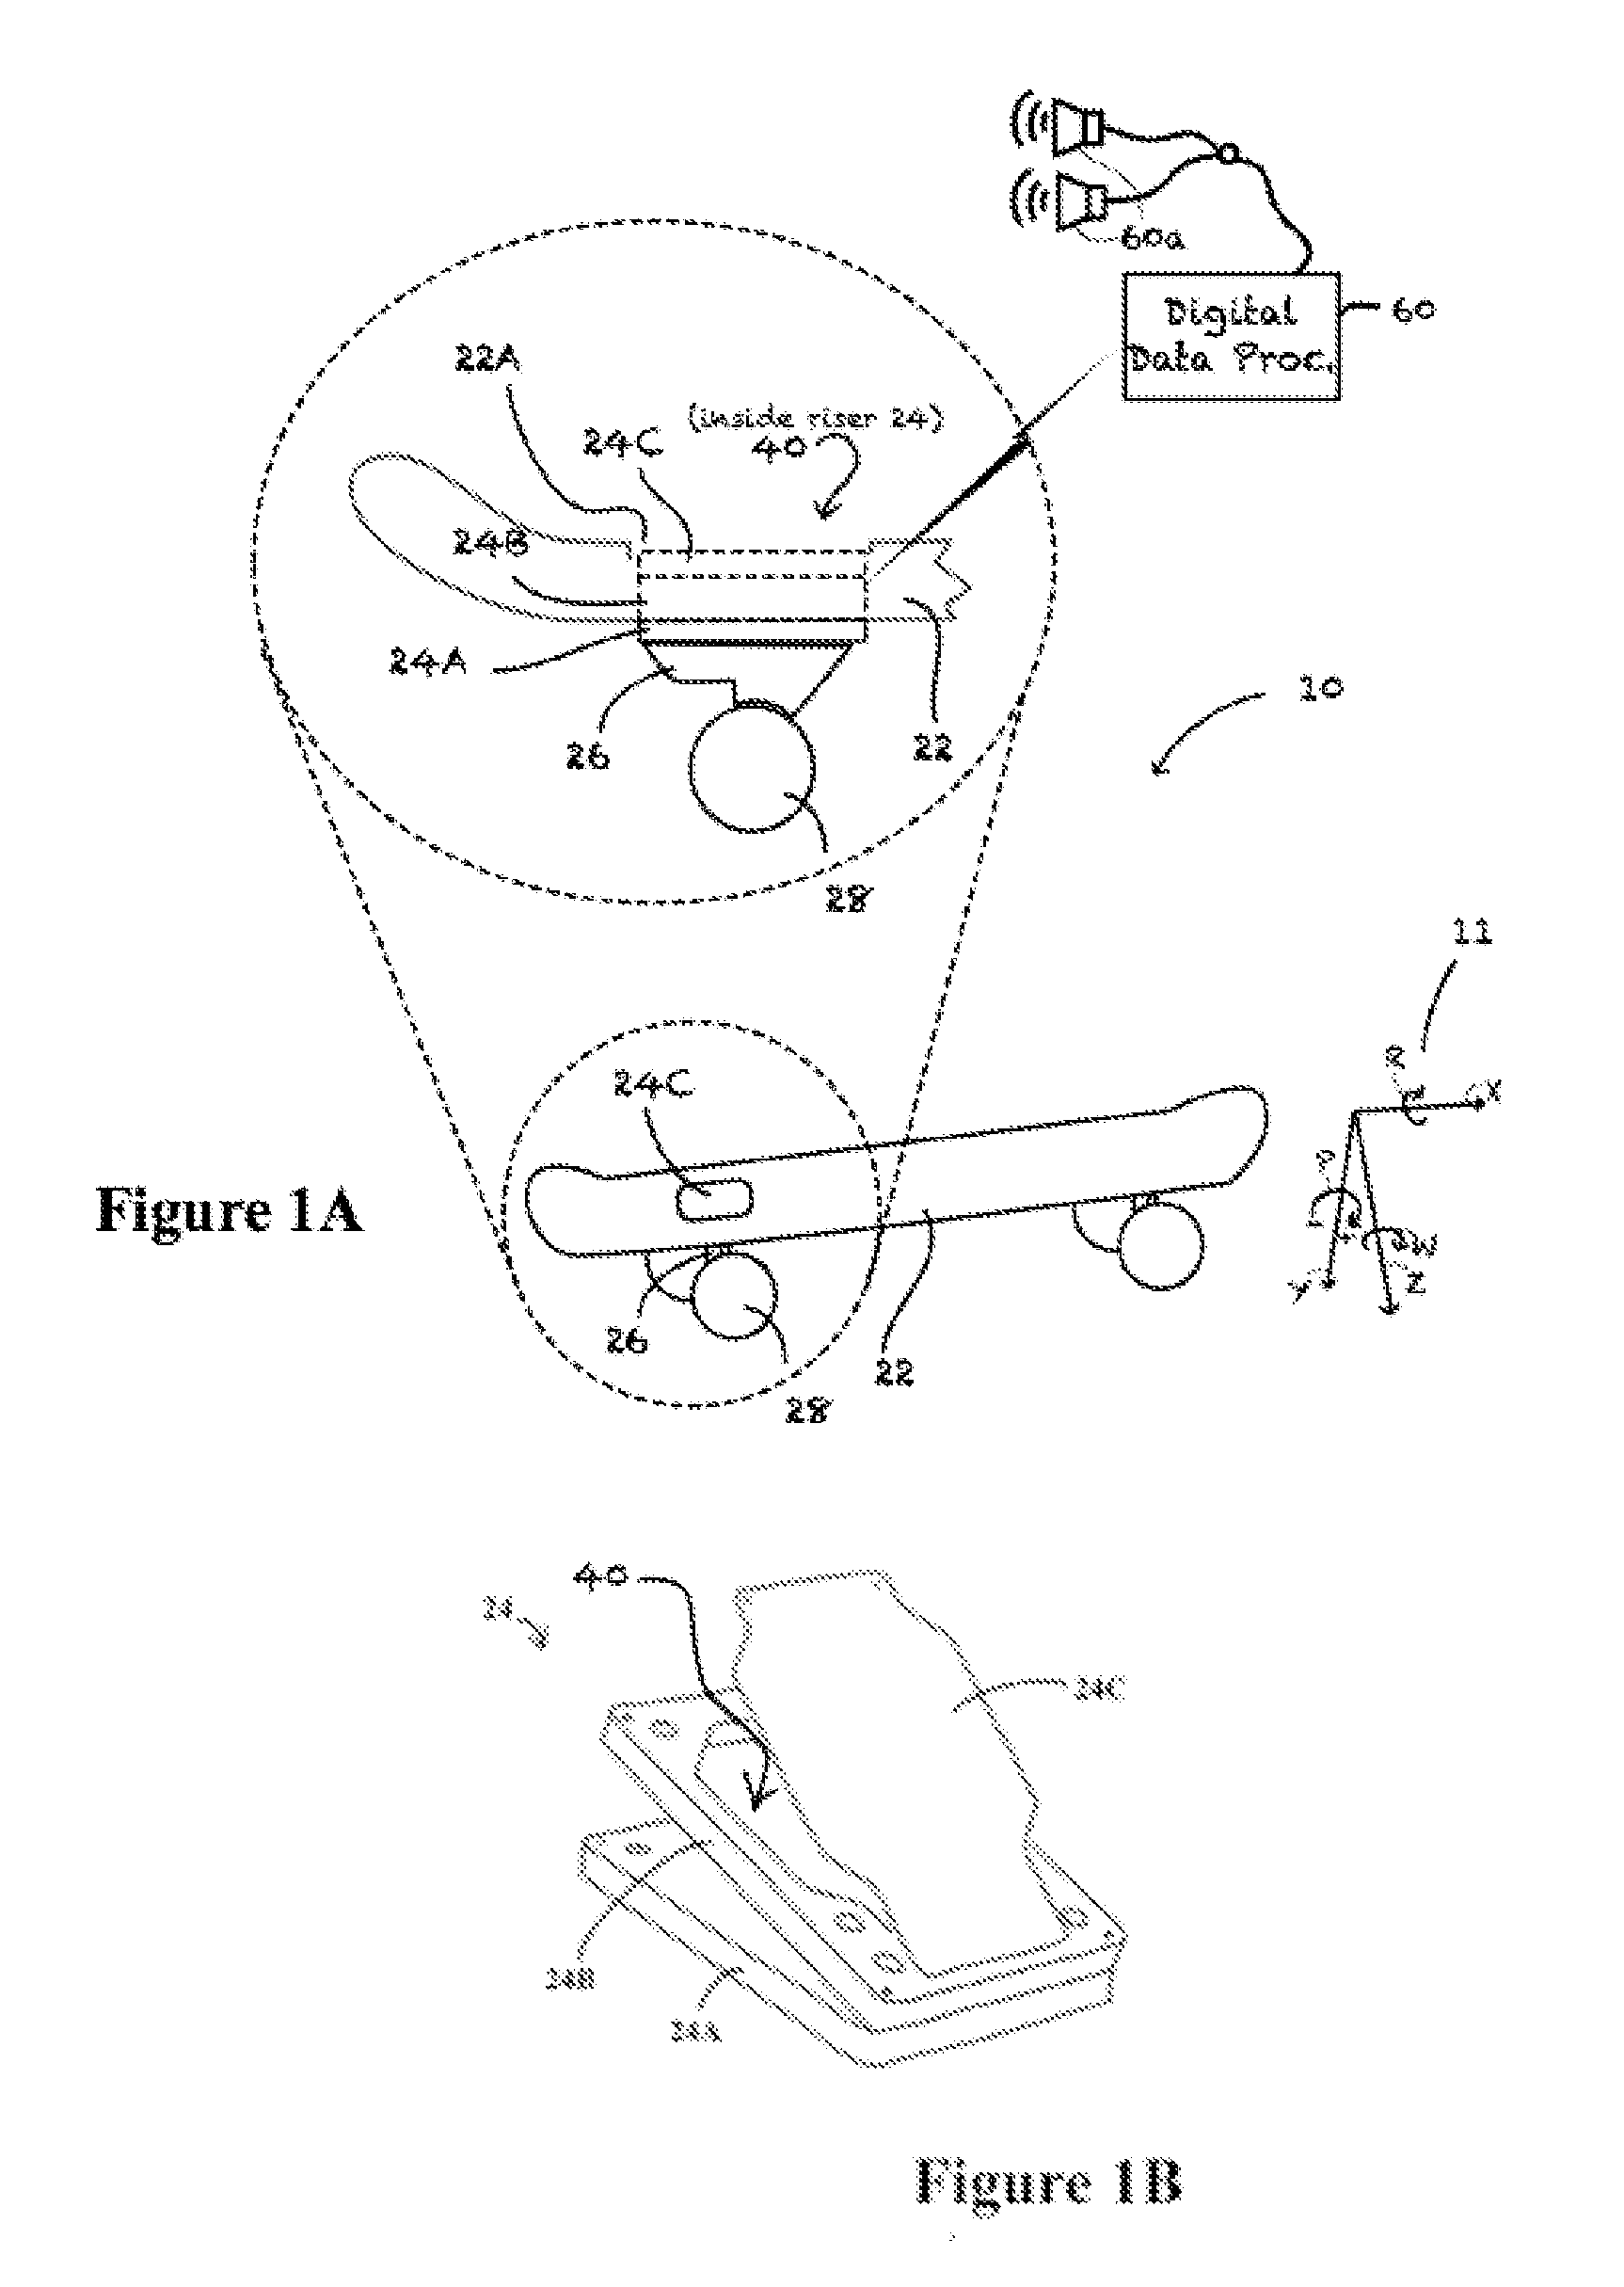 Signature-based trick determination systems and methods for skateboarding and other activities of motion